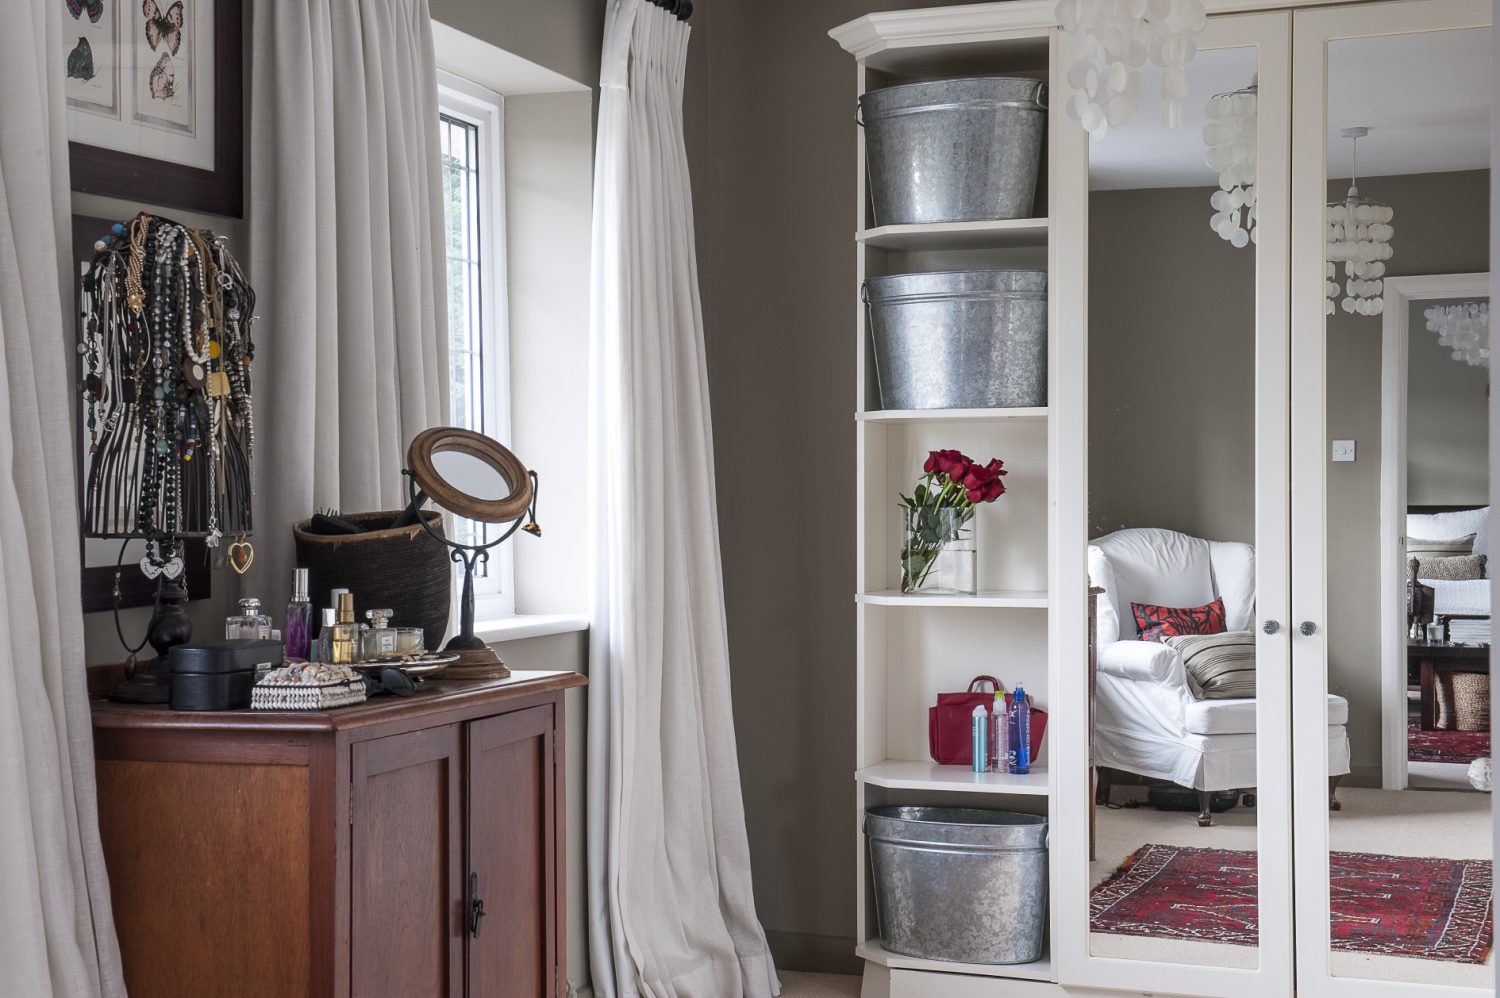 The bright dressing room provides ample storage for clothes and accessories